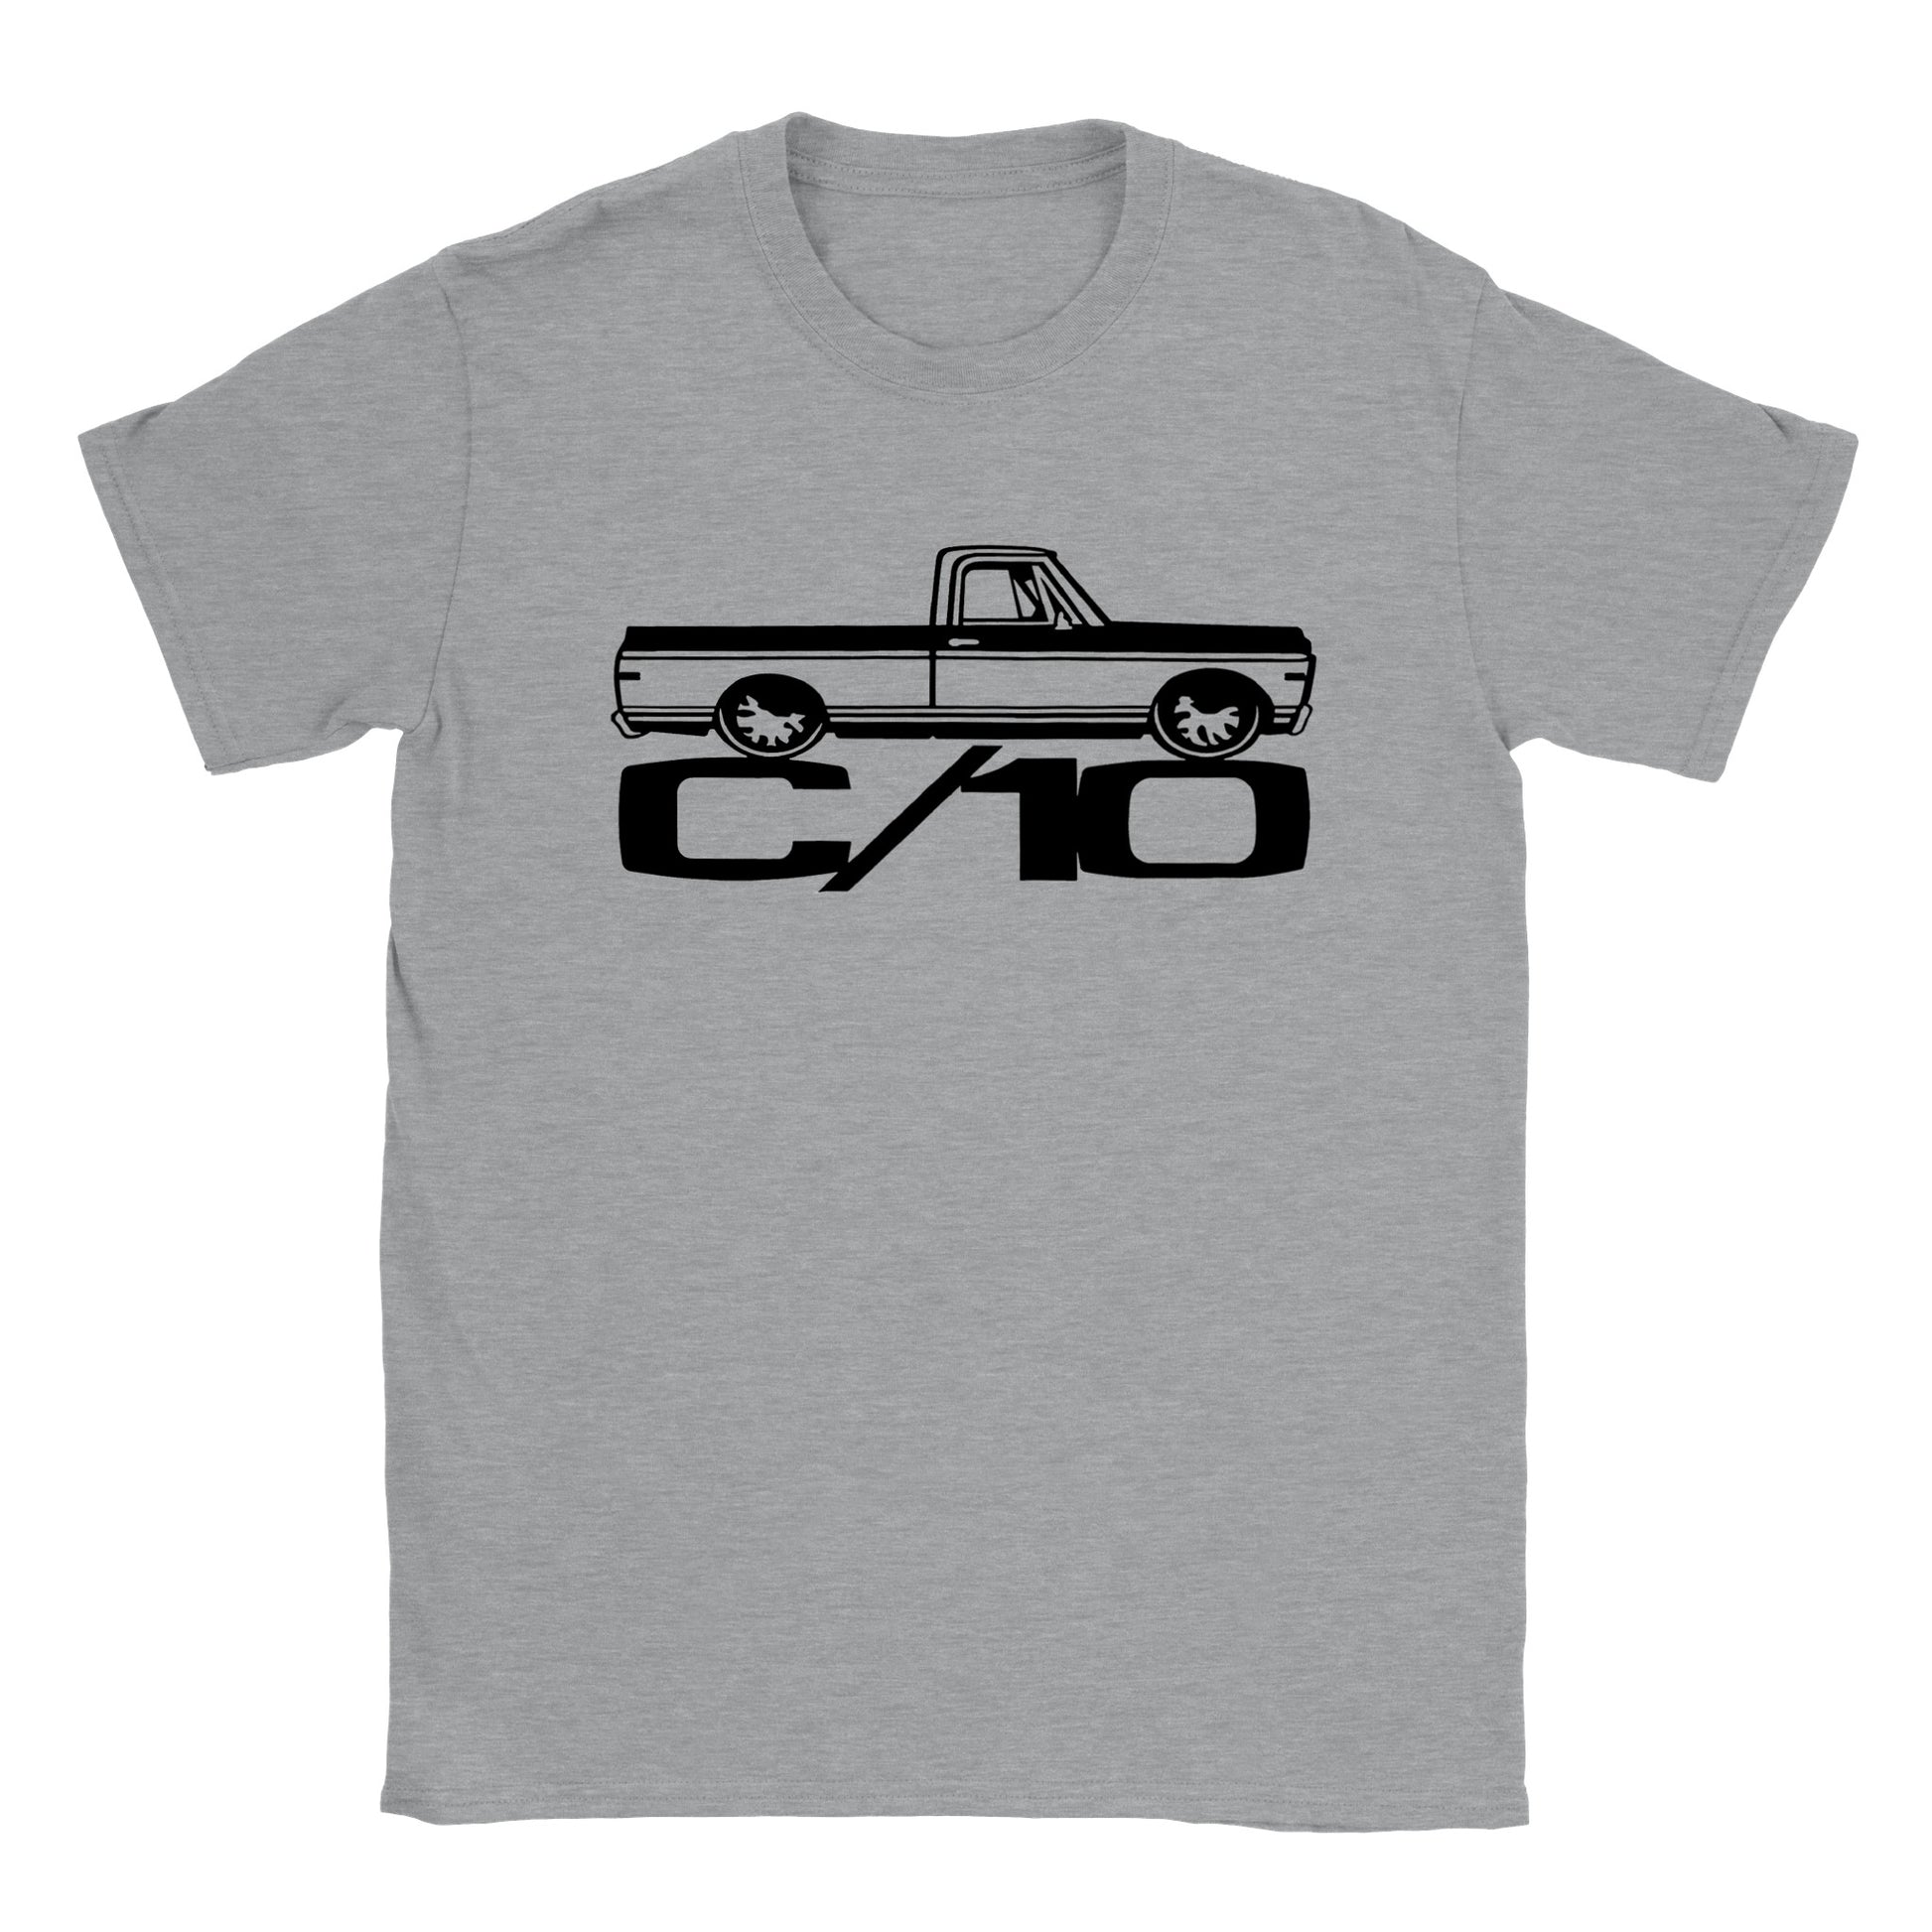 Chevy C/10 T-shirt - Mister Snarky's